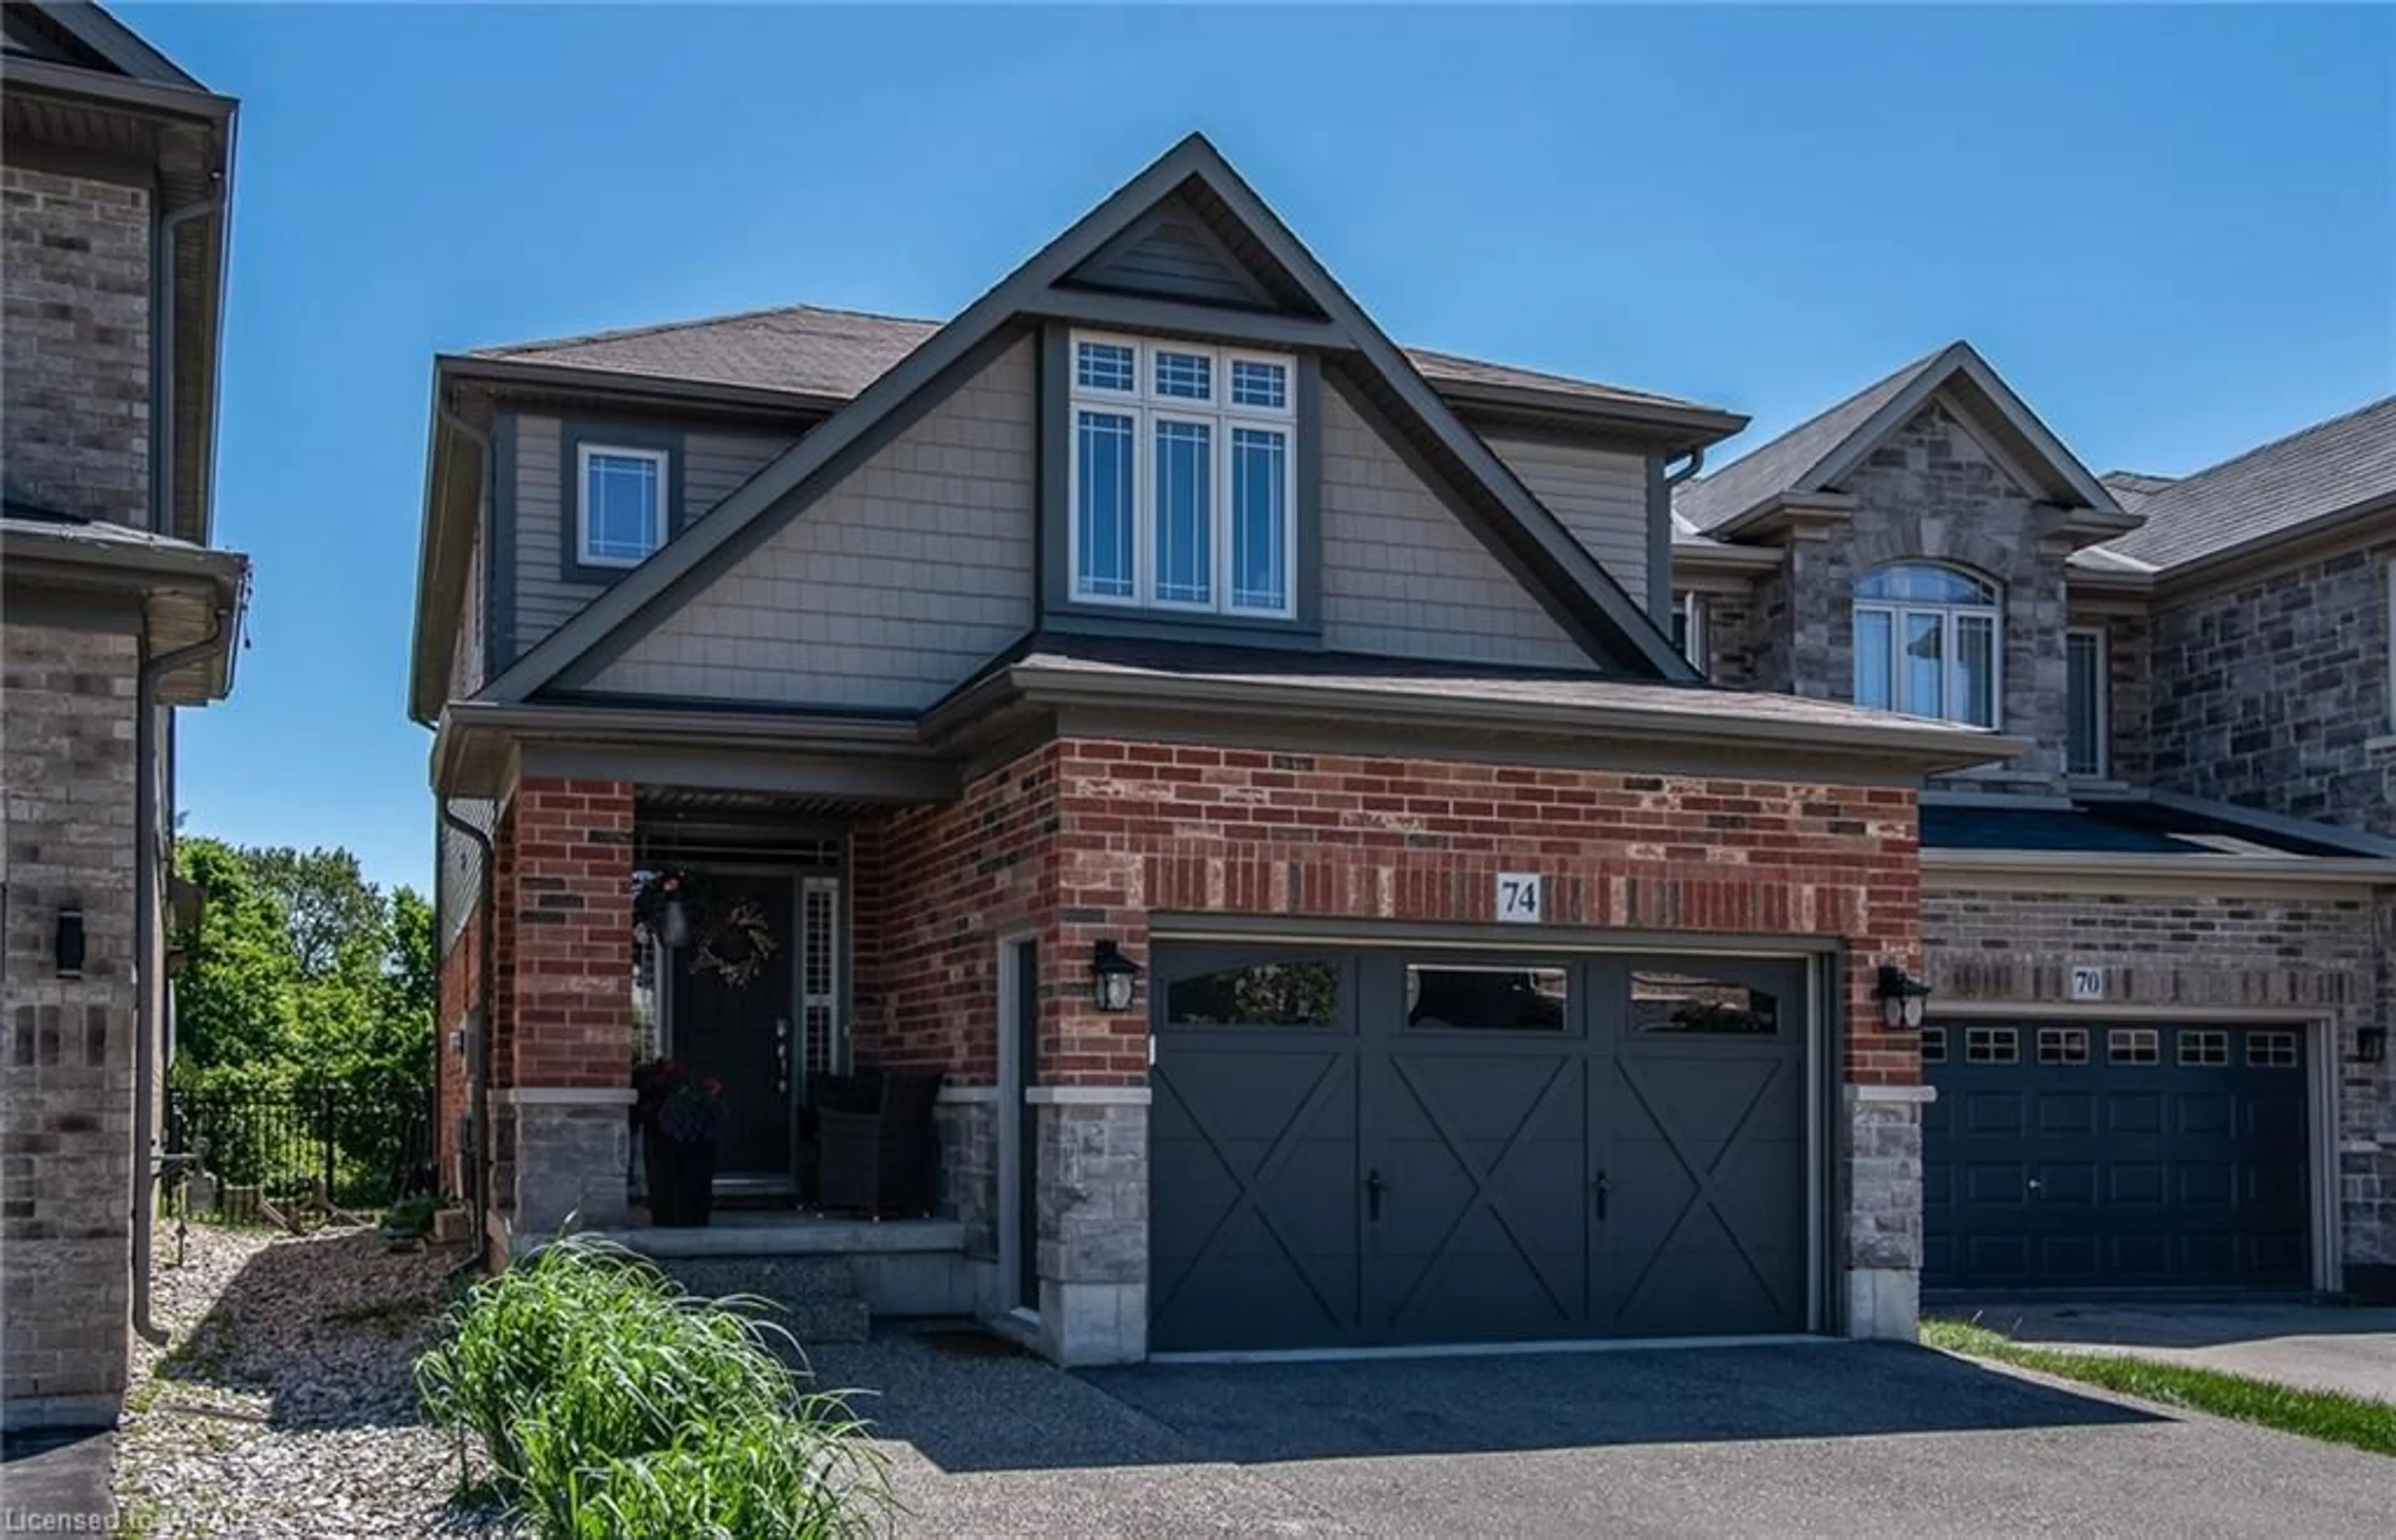 Home with brick exterior material for 74 Forest Creek Dr, Kitchener Ontario N2R 0B5